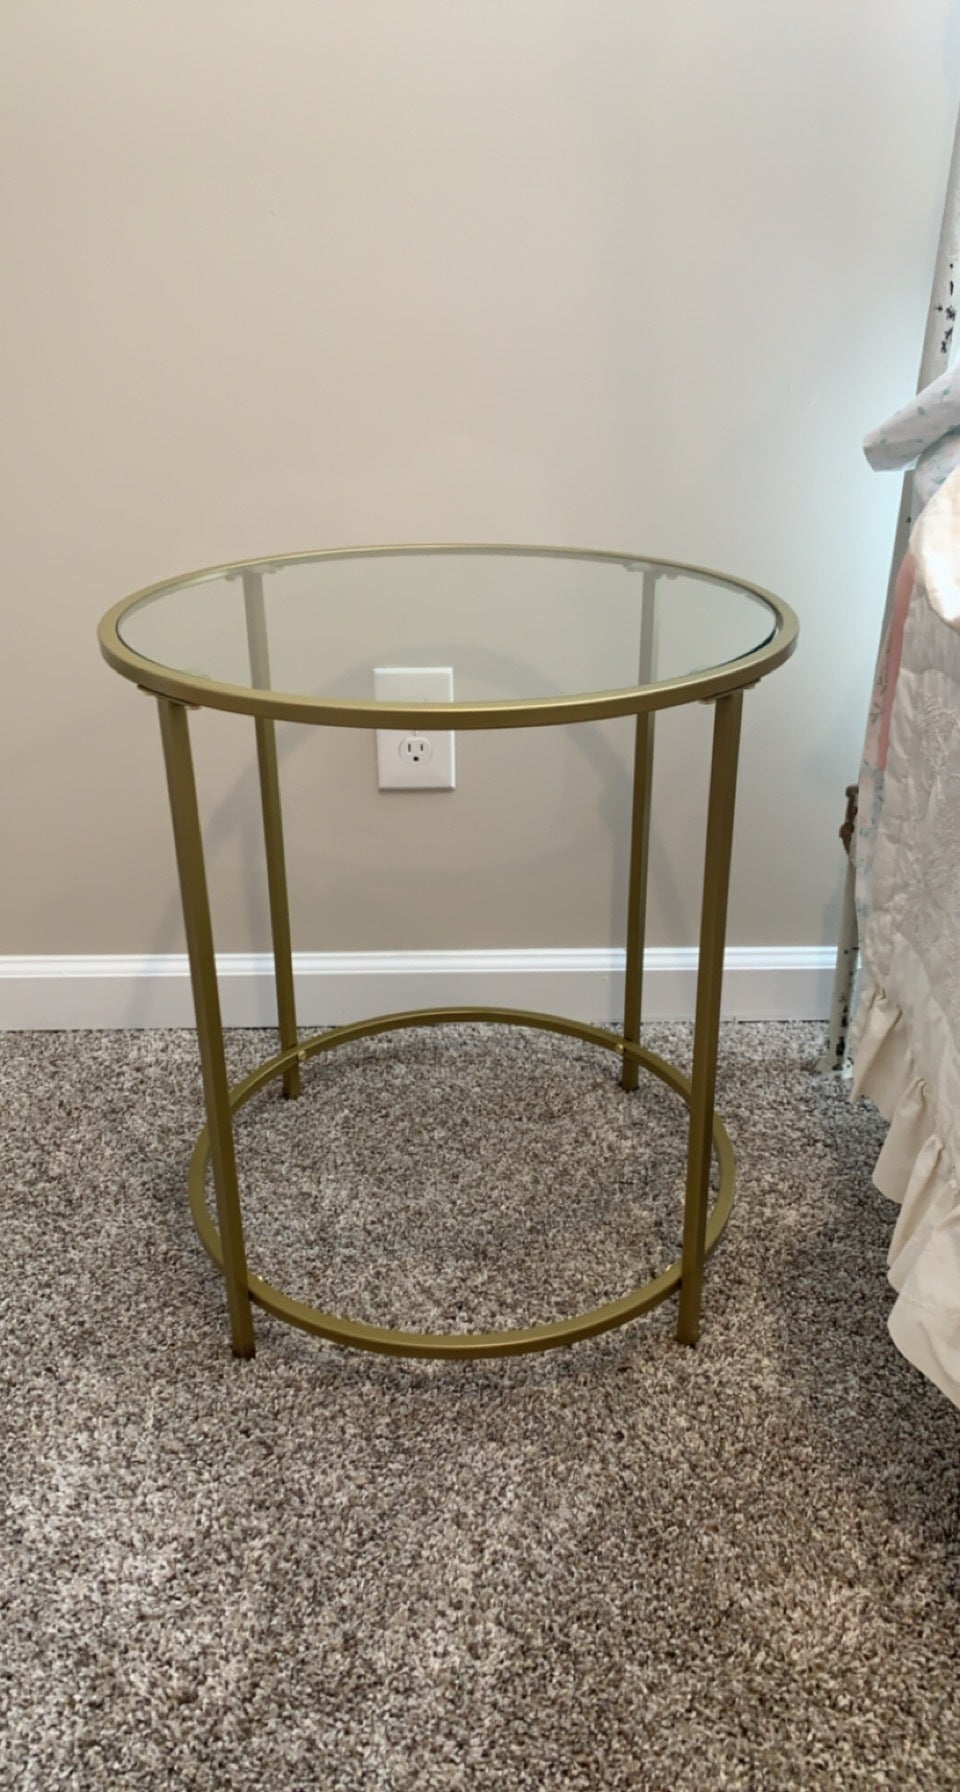 Golden Glass Round Side Table with Metal Frame - HWLEXTRA